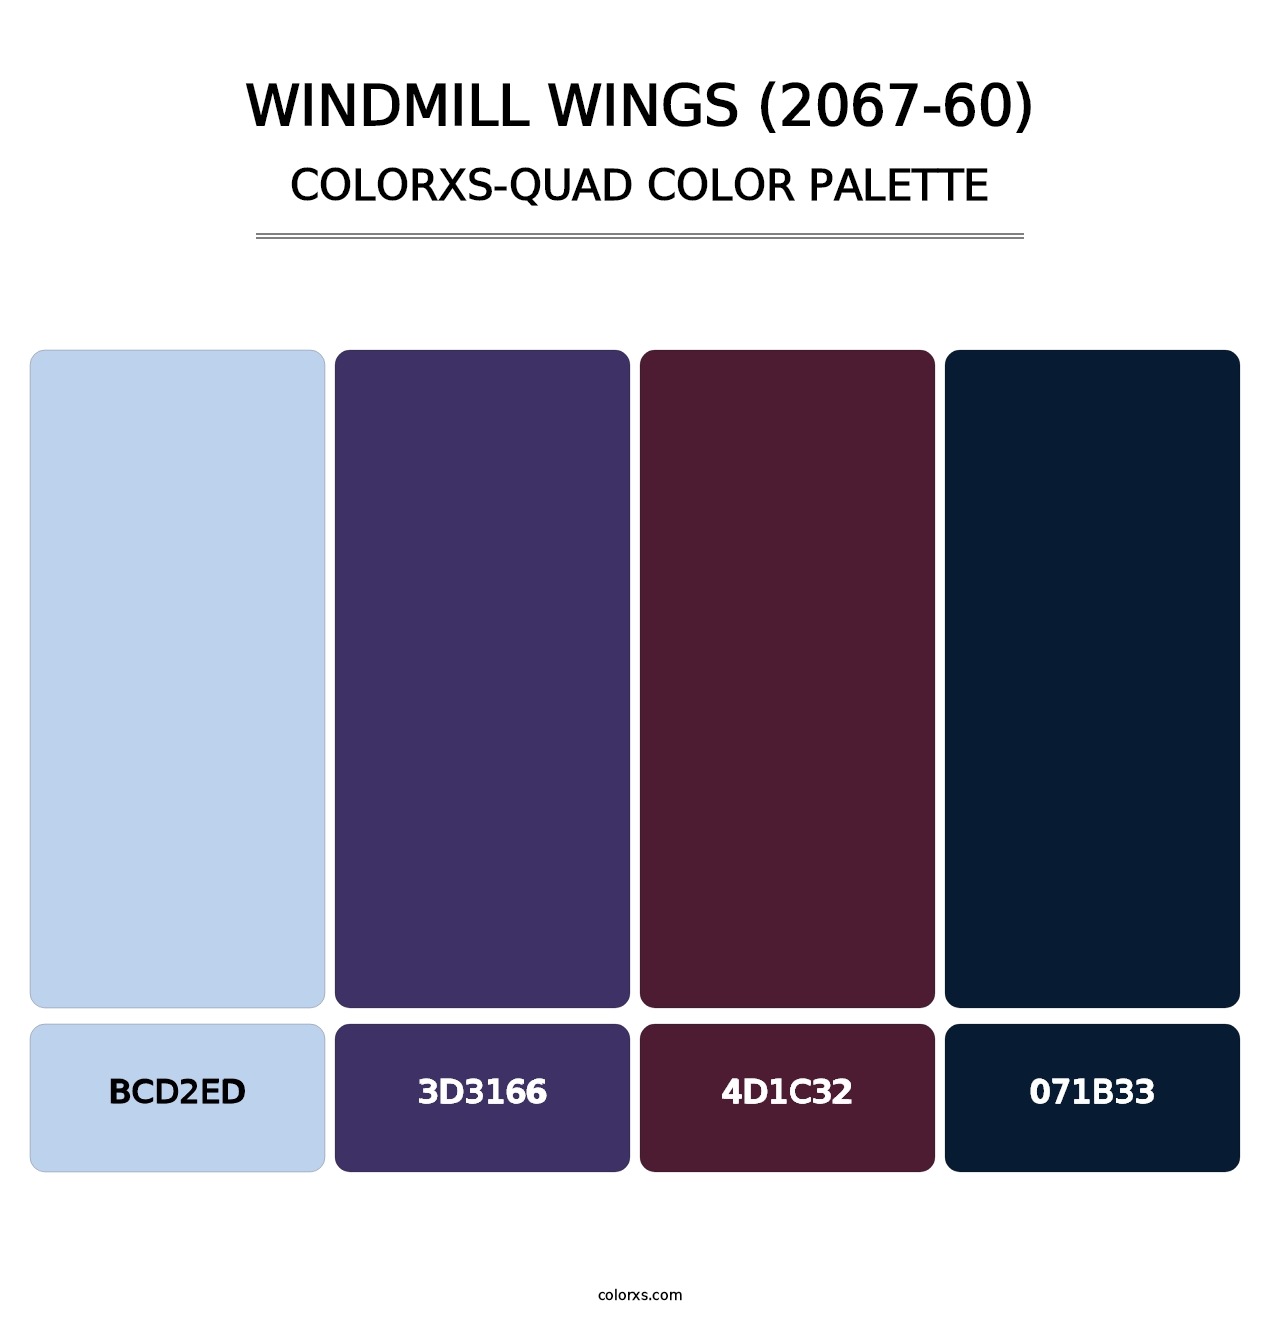 Windmill Wings (2067-60) - Colorxs Quad Palette